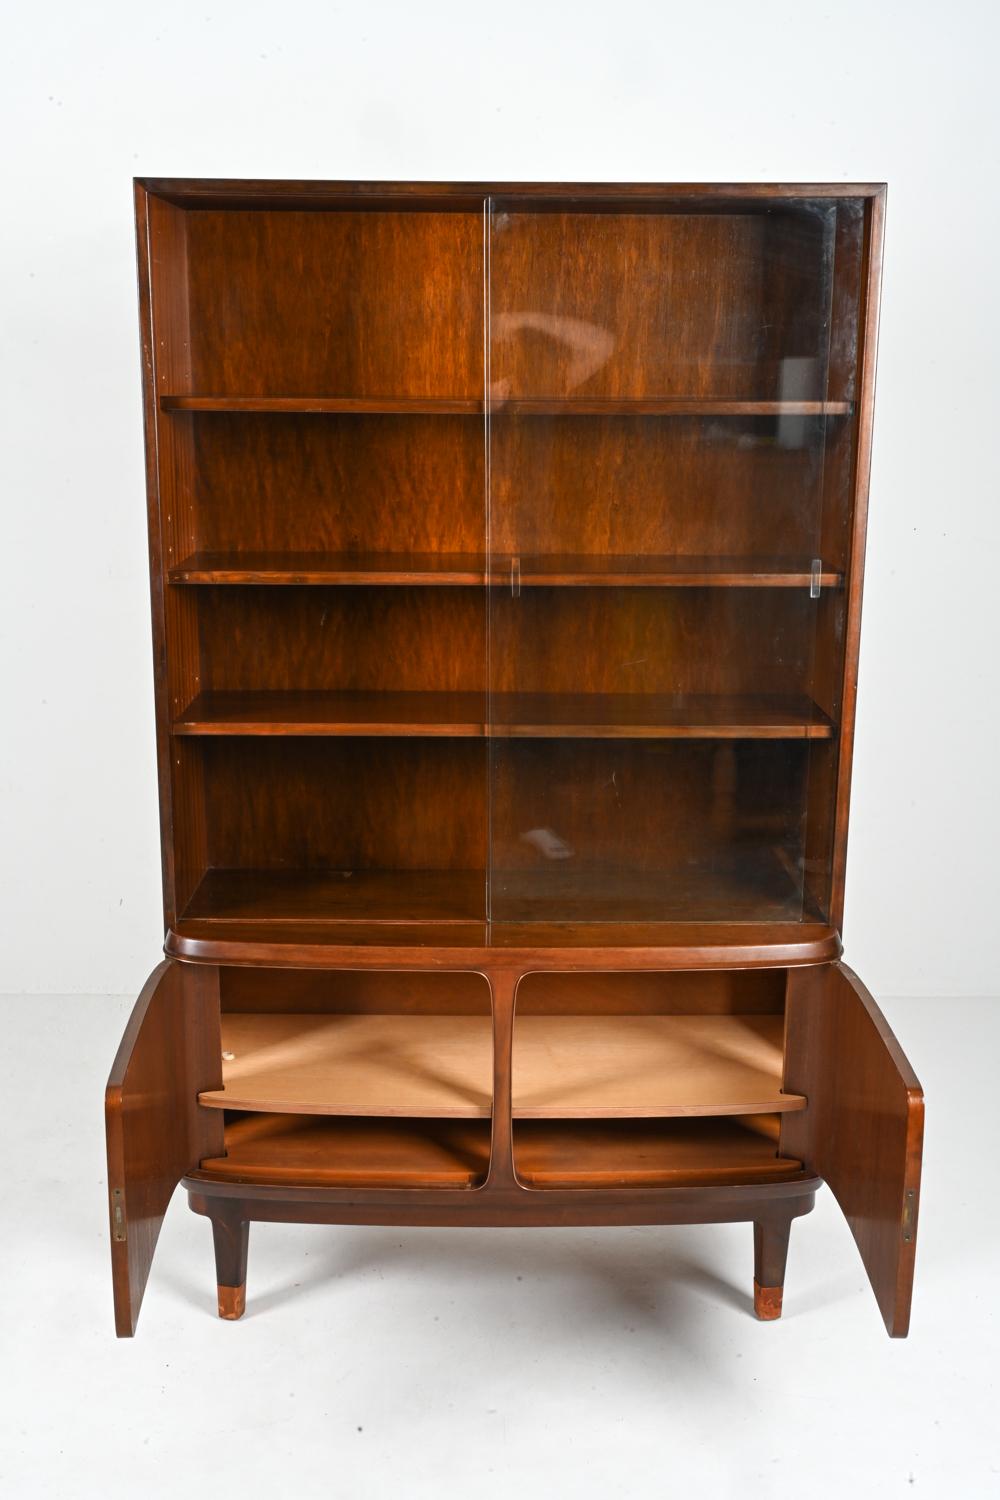 Danish Art Deco Glass-Front Bookcase or Display Cabinet by Georg Kofoed For Sale 1